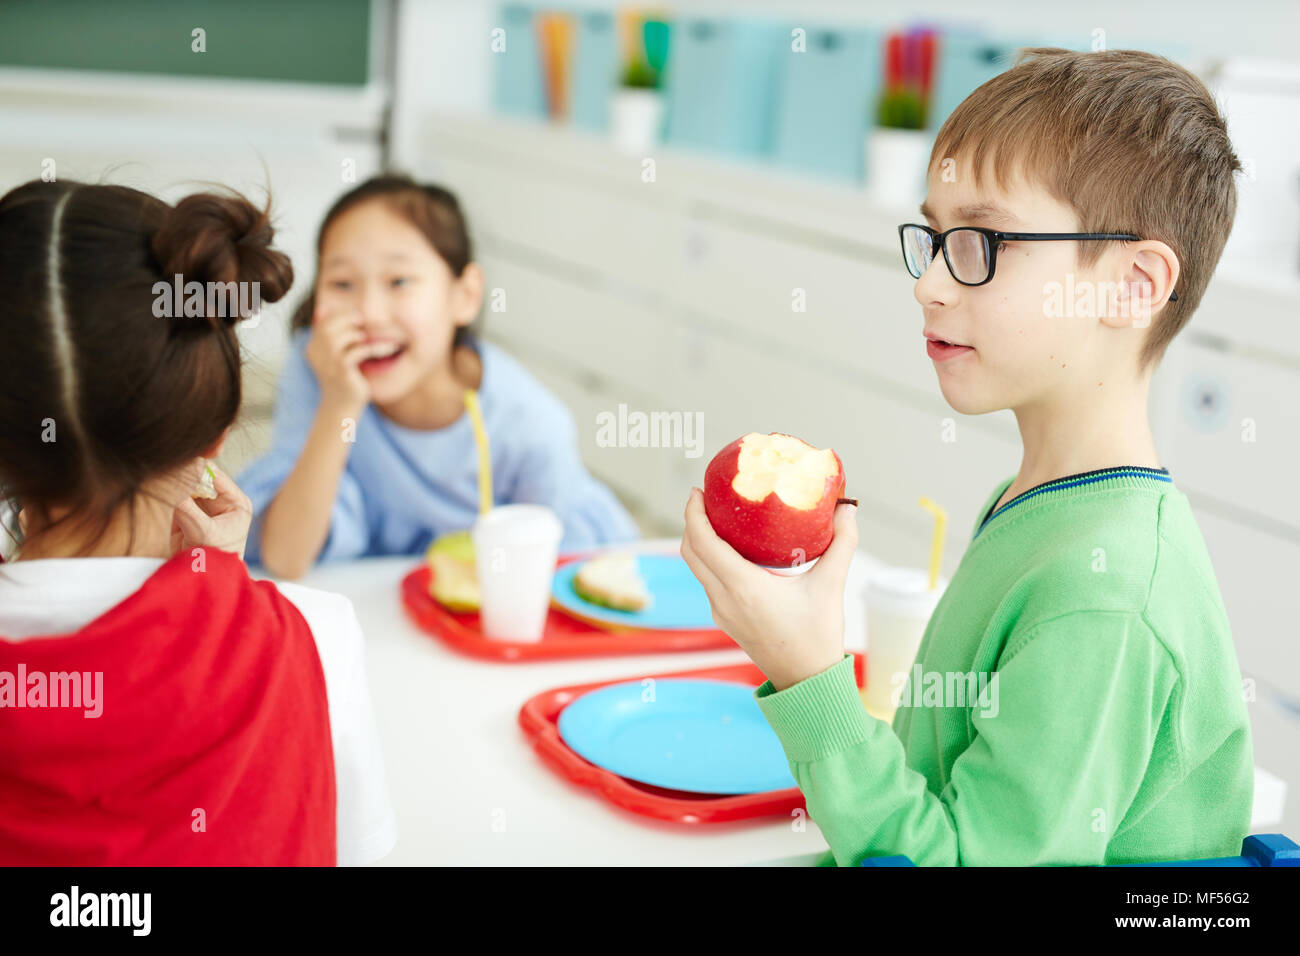 Online activity promotion Group of Children in the Canteen at Lunch Stock  Image - Image of girl, child: 120283265, kids canteen 